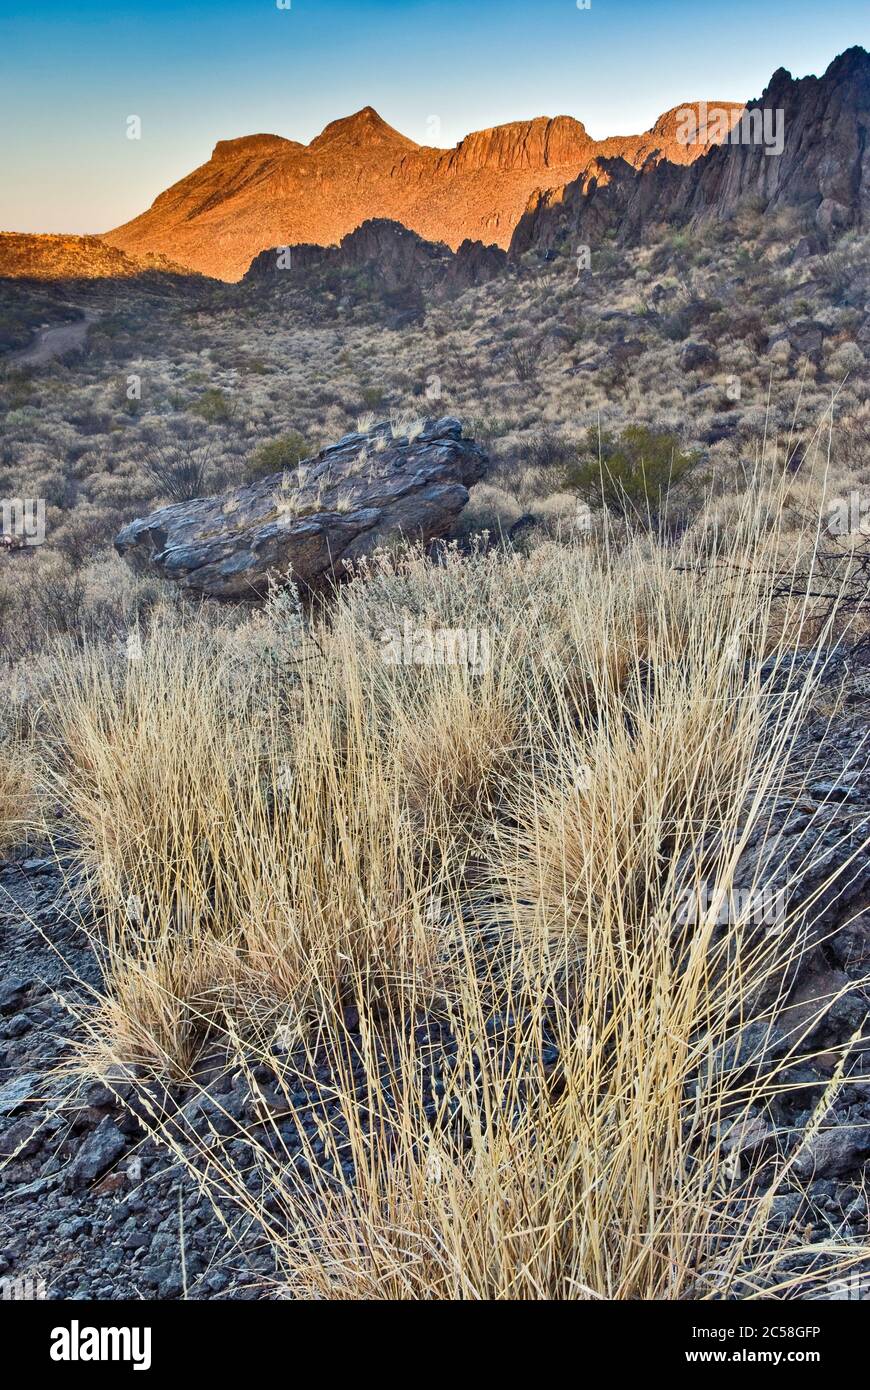 Agua Adentro Mountain at sunrise, grass growing back after decades of overgrazing damage at Chihuahuan Desert in Big Bend Ranch State Park, Texas, USA Stock Photo